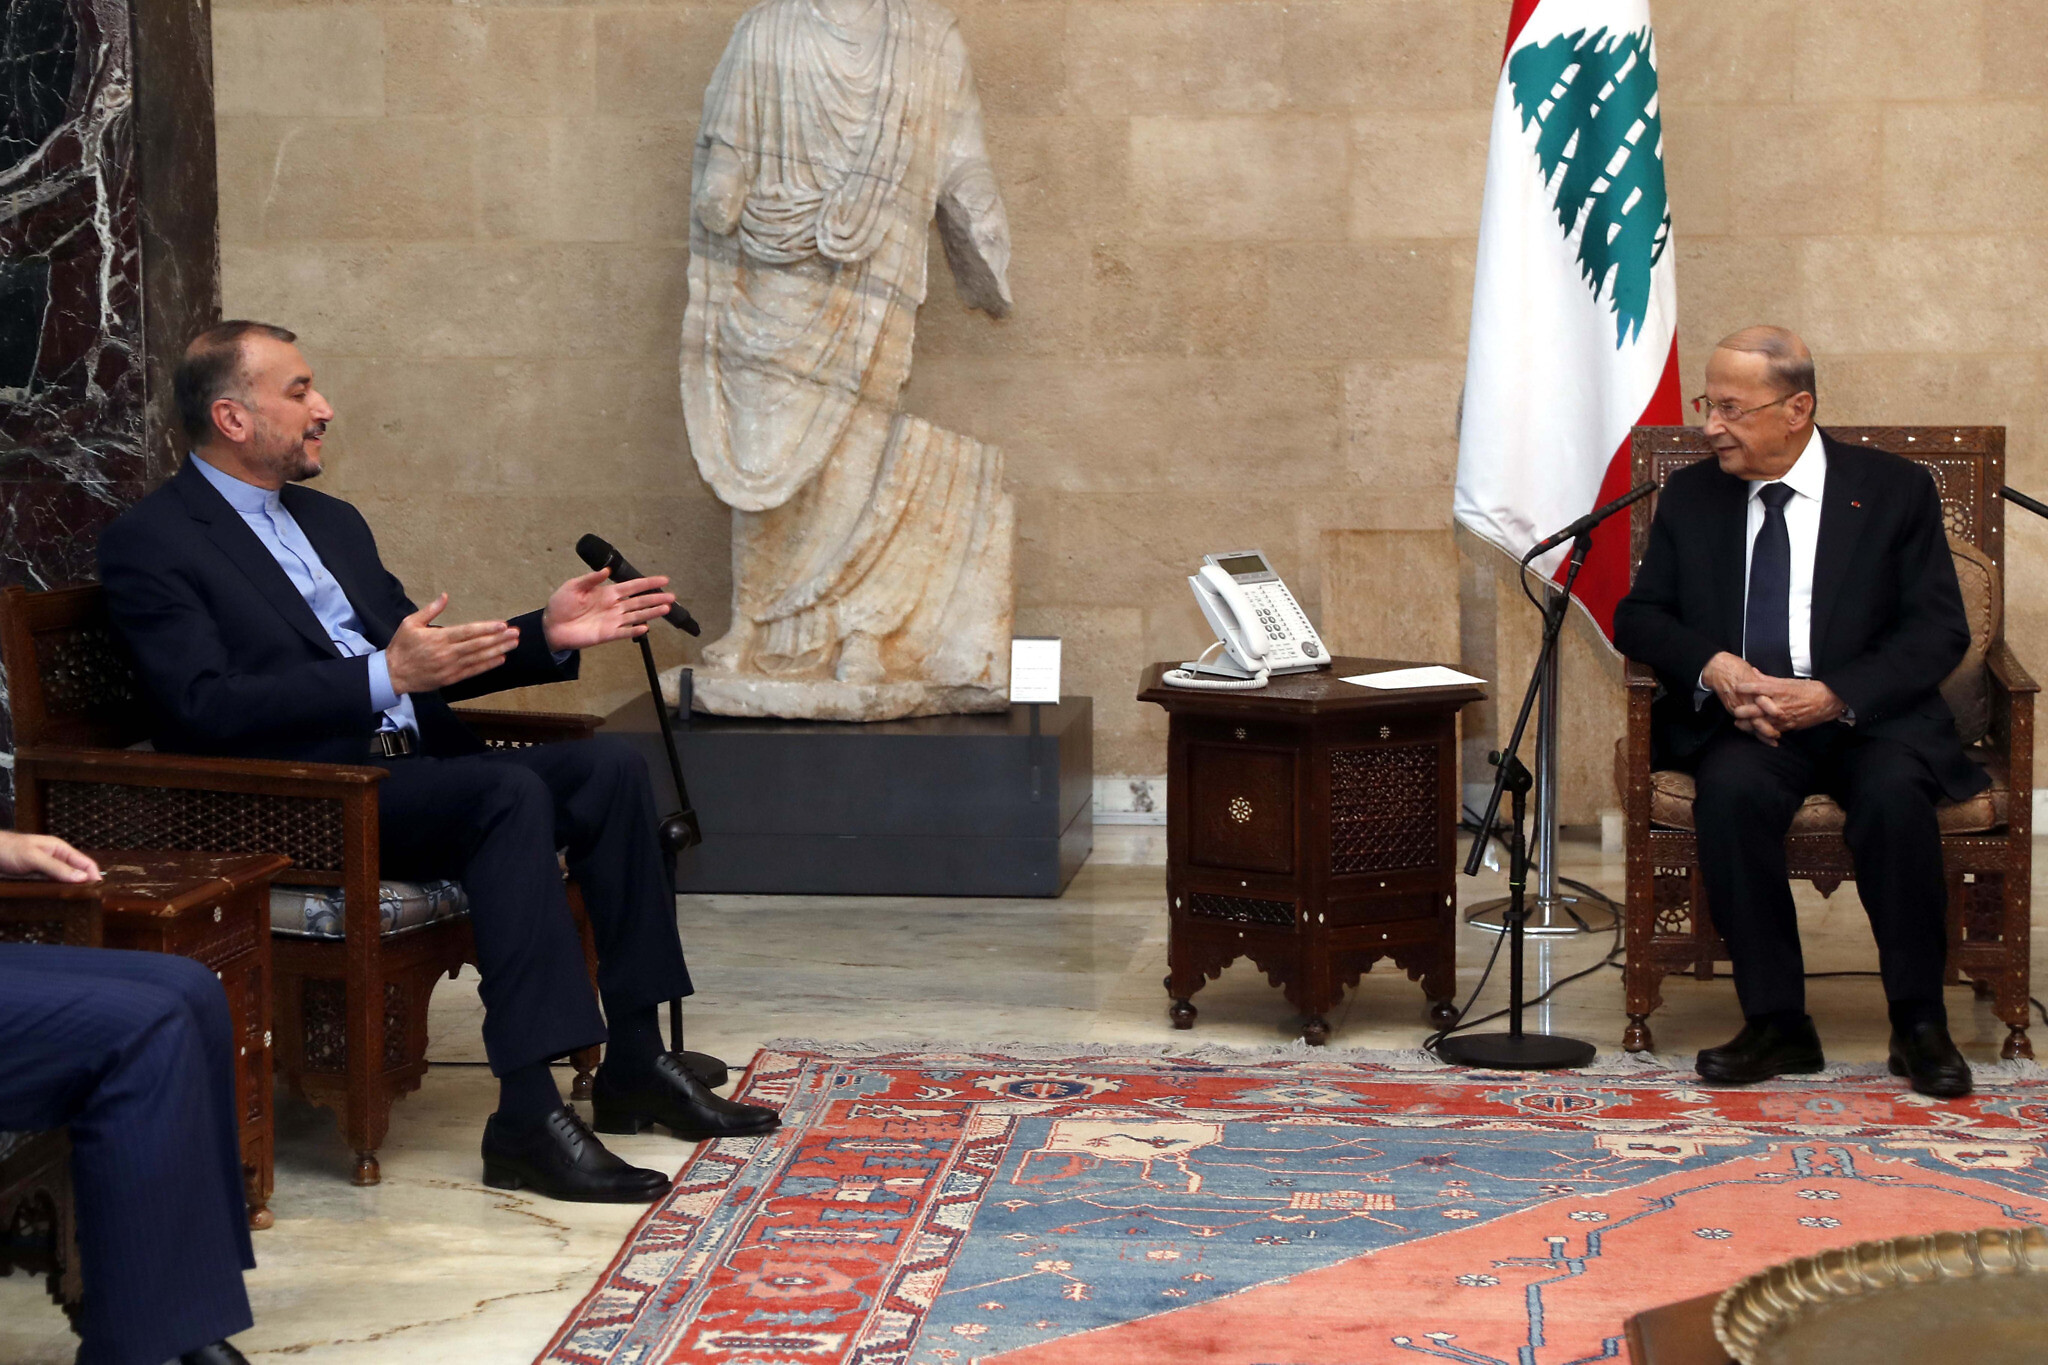 Amir-Abdollahian: We regard Lebanon’s security as integral to the security of Iran and the region